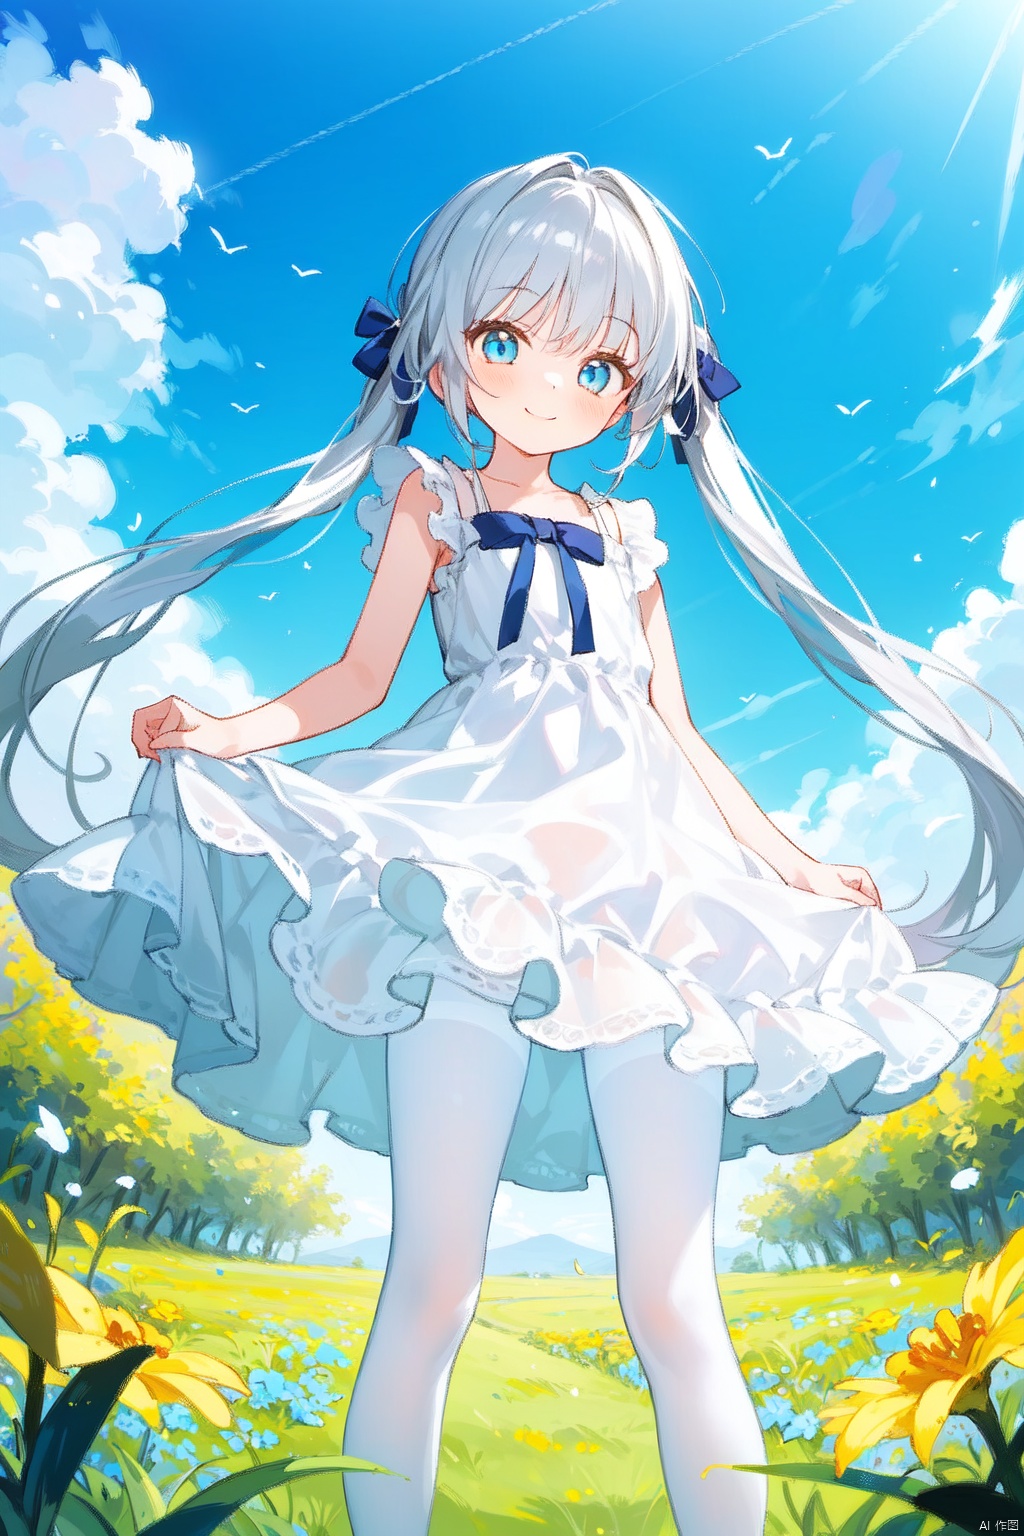  (masterpiece, best quality), one girl, long silver hair, light blue eyes, twin tails, white pantyhose, sundress, petite, smile, standing in a sunny field with a gentle breeze rustling the grass and flowers around her